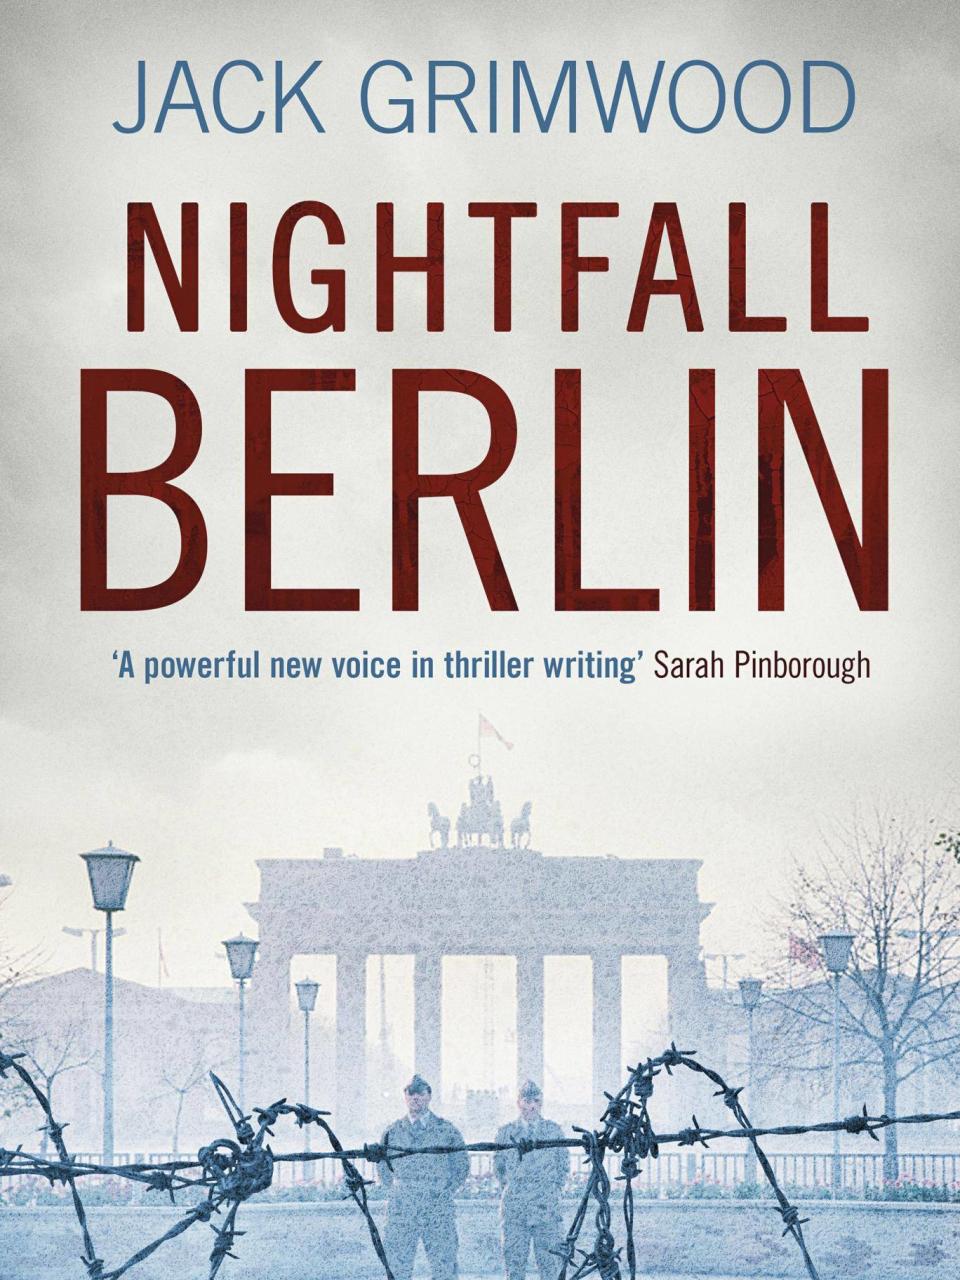 Grimwood spent a lot of time in Germany for his latest thriller (Michael Joseph/Penguin)